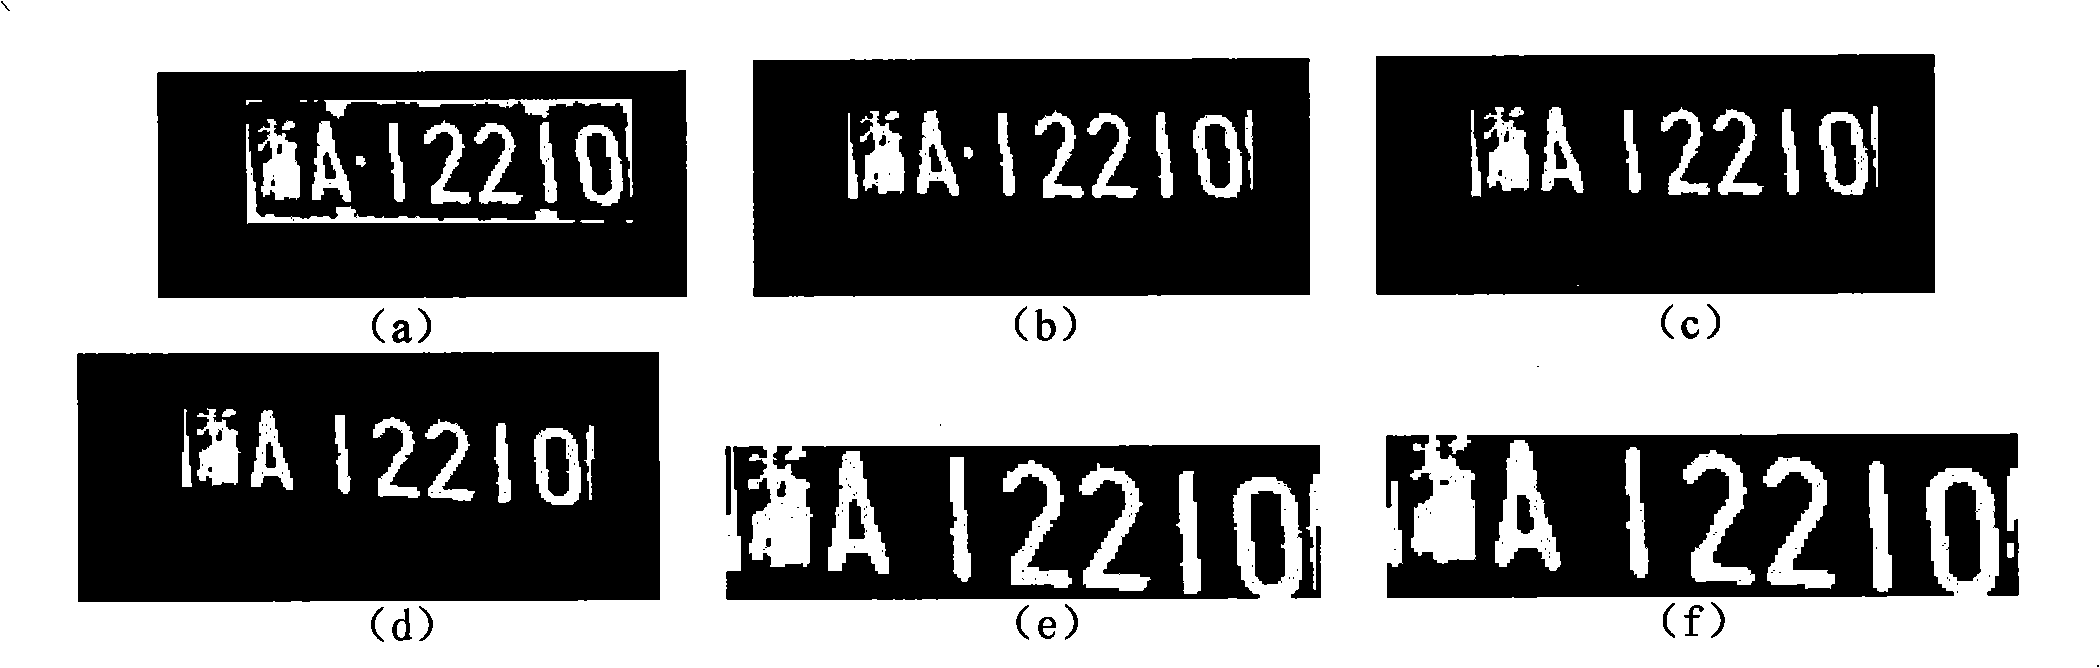 Method for recognizing license plate character based on wide gridding characteristic extraction and BP neural network